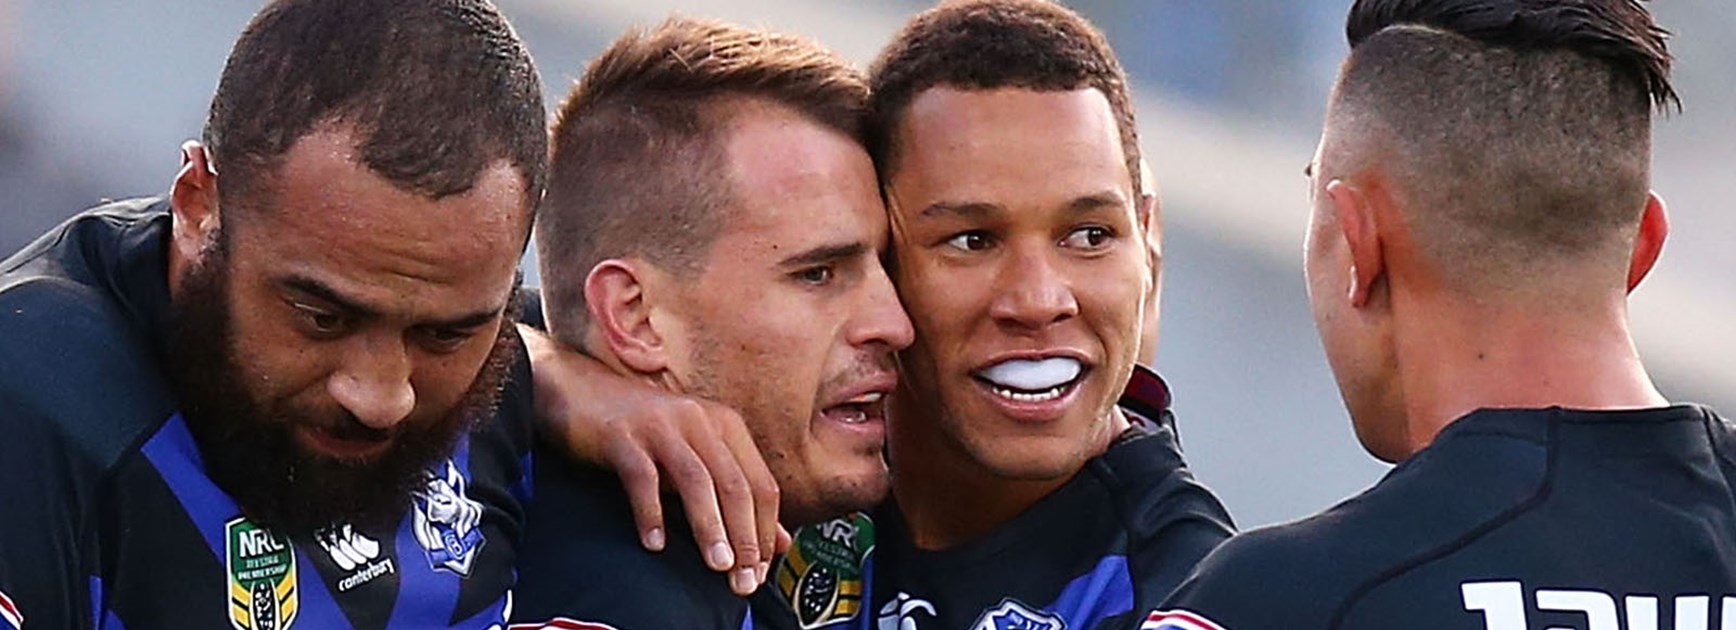 Josh Reynolds and Moses Mbye celebrate another Bulldogs victory.